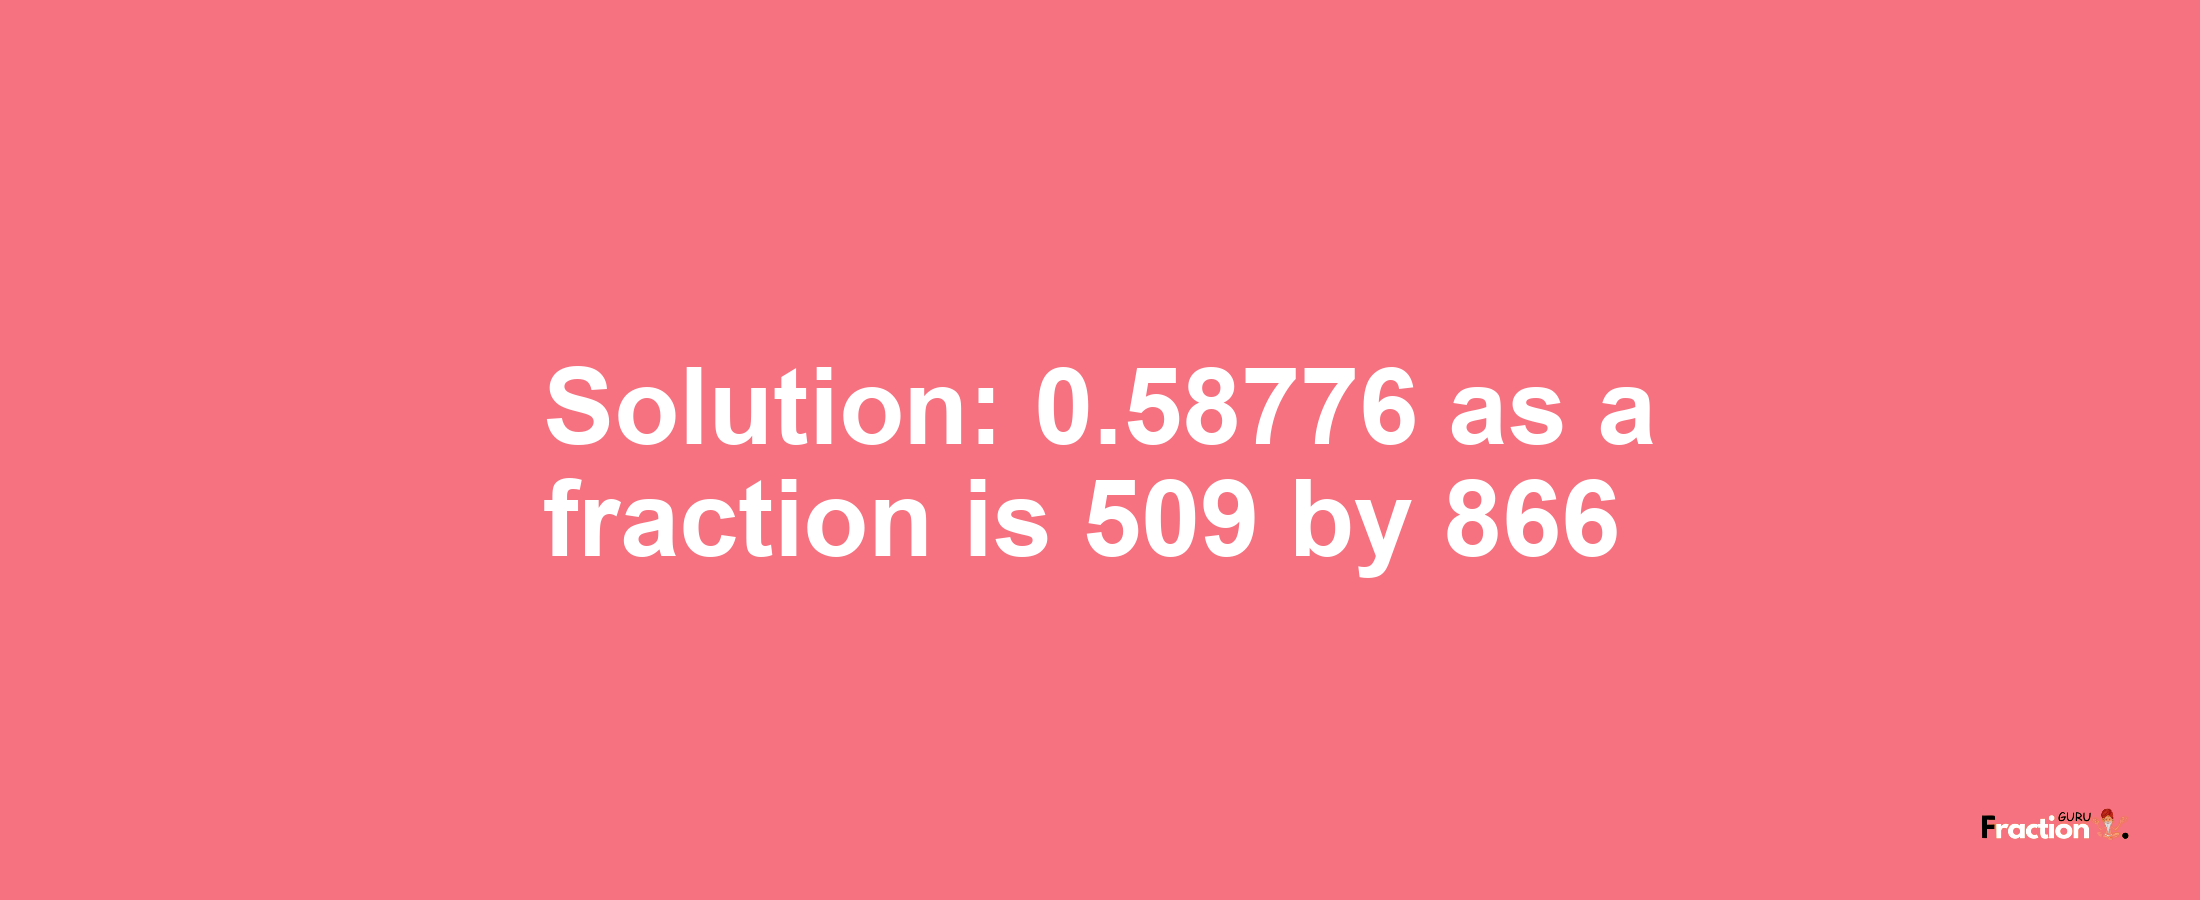 Solution:0.58776 as a fraction is 509/866